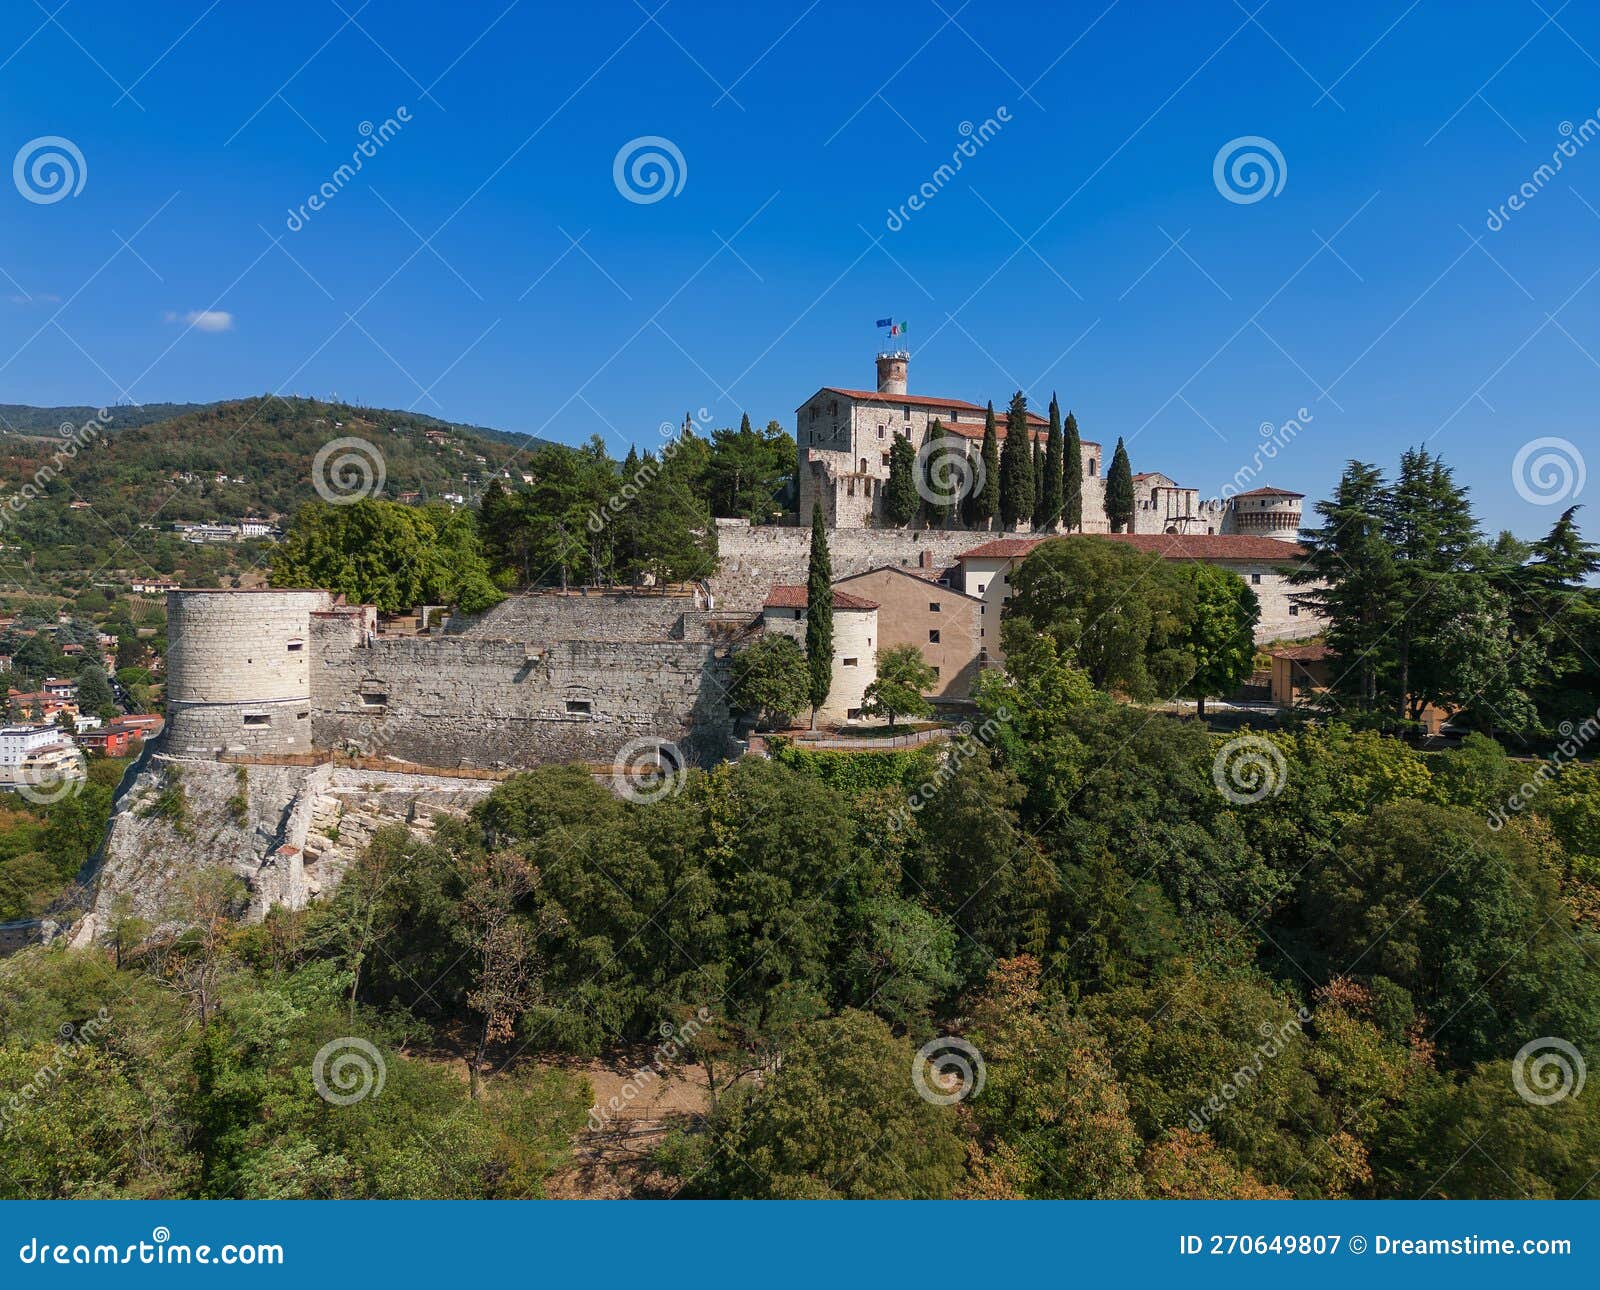 beautiful view of the old park and the hill (colle cidneo) with the historic castle on it in brescia town